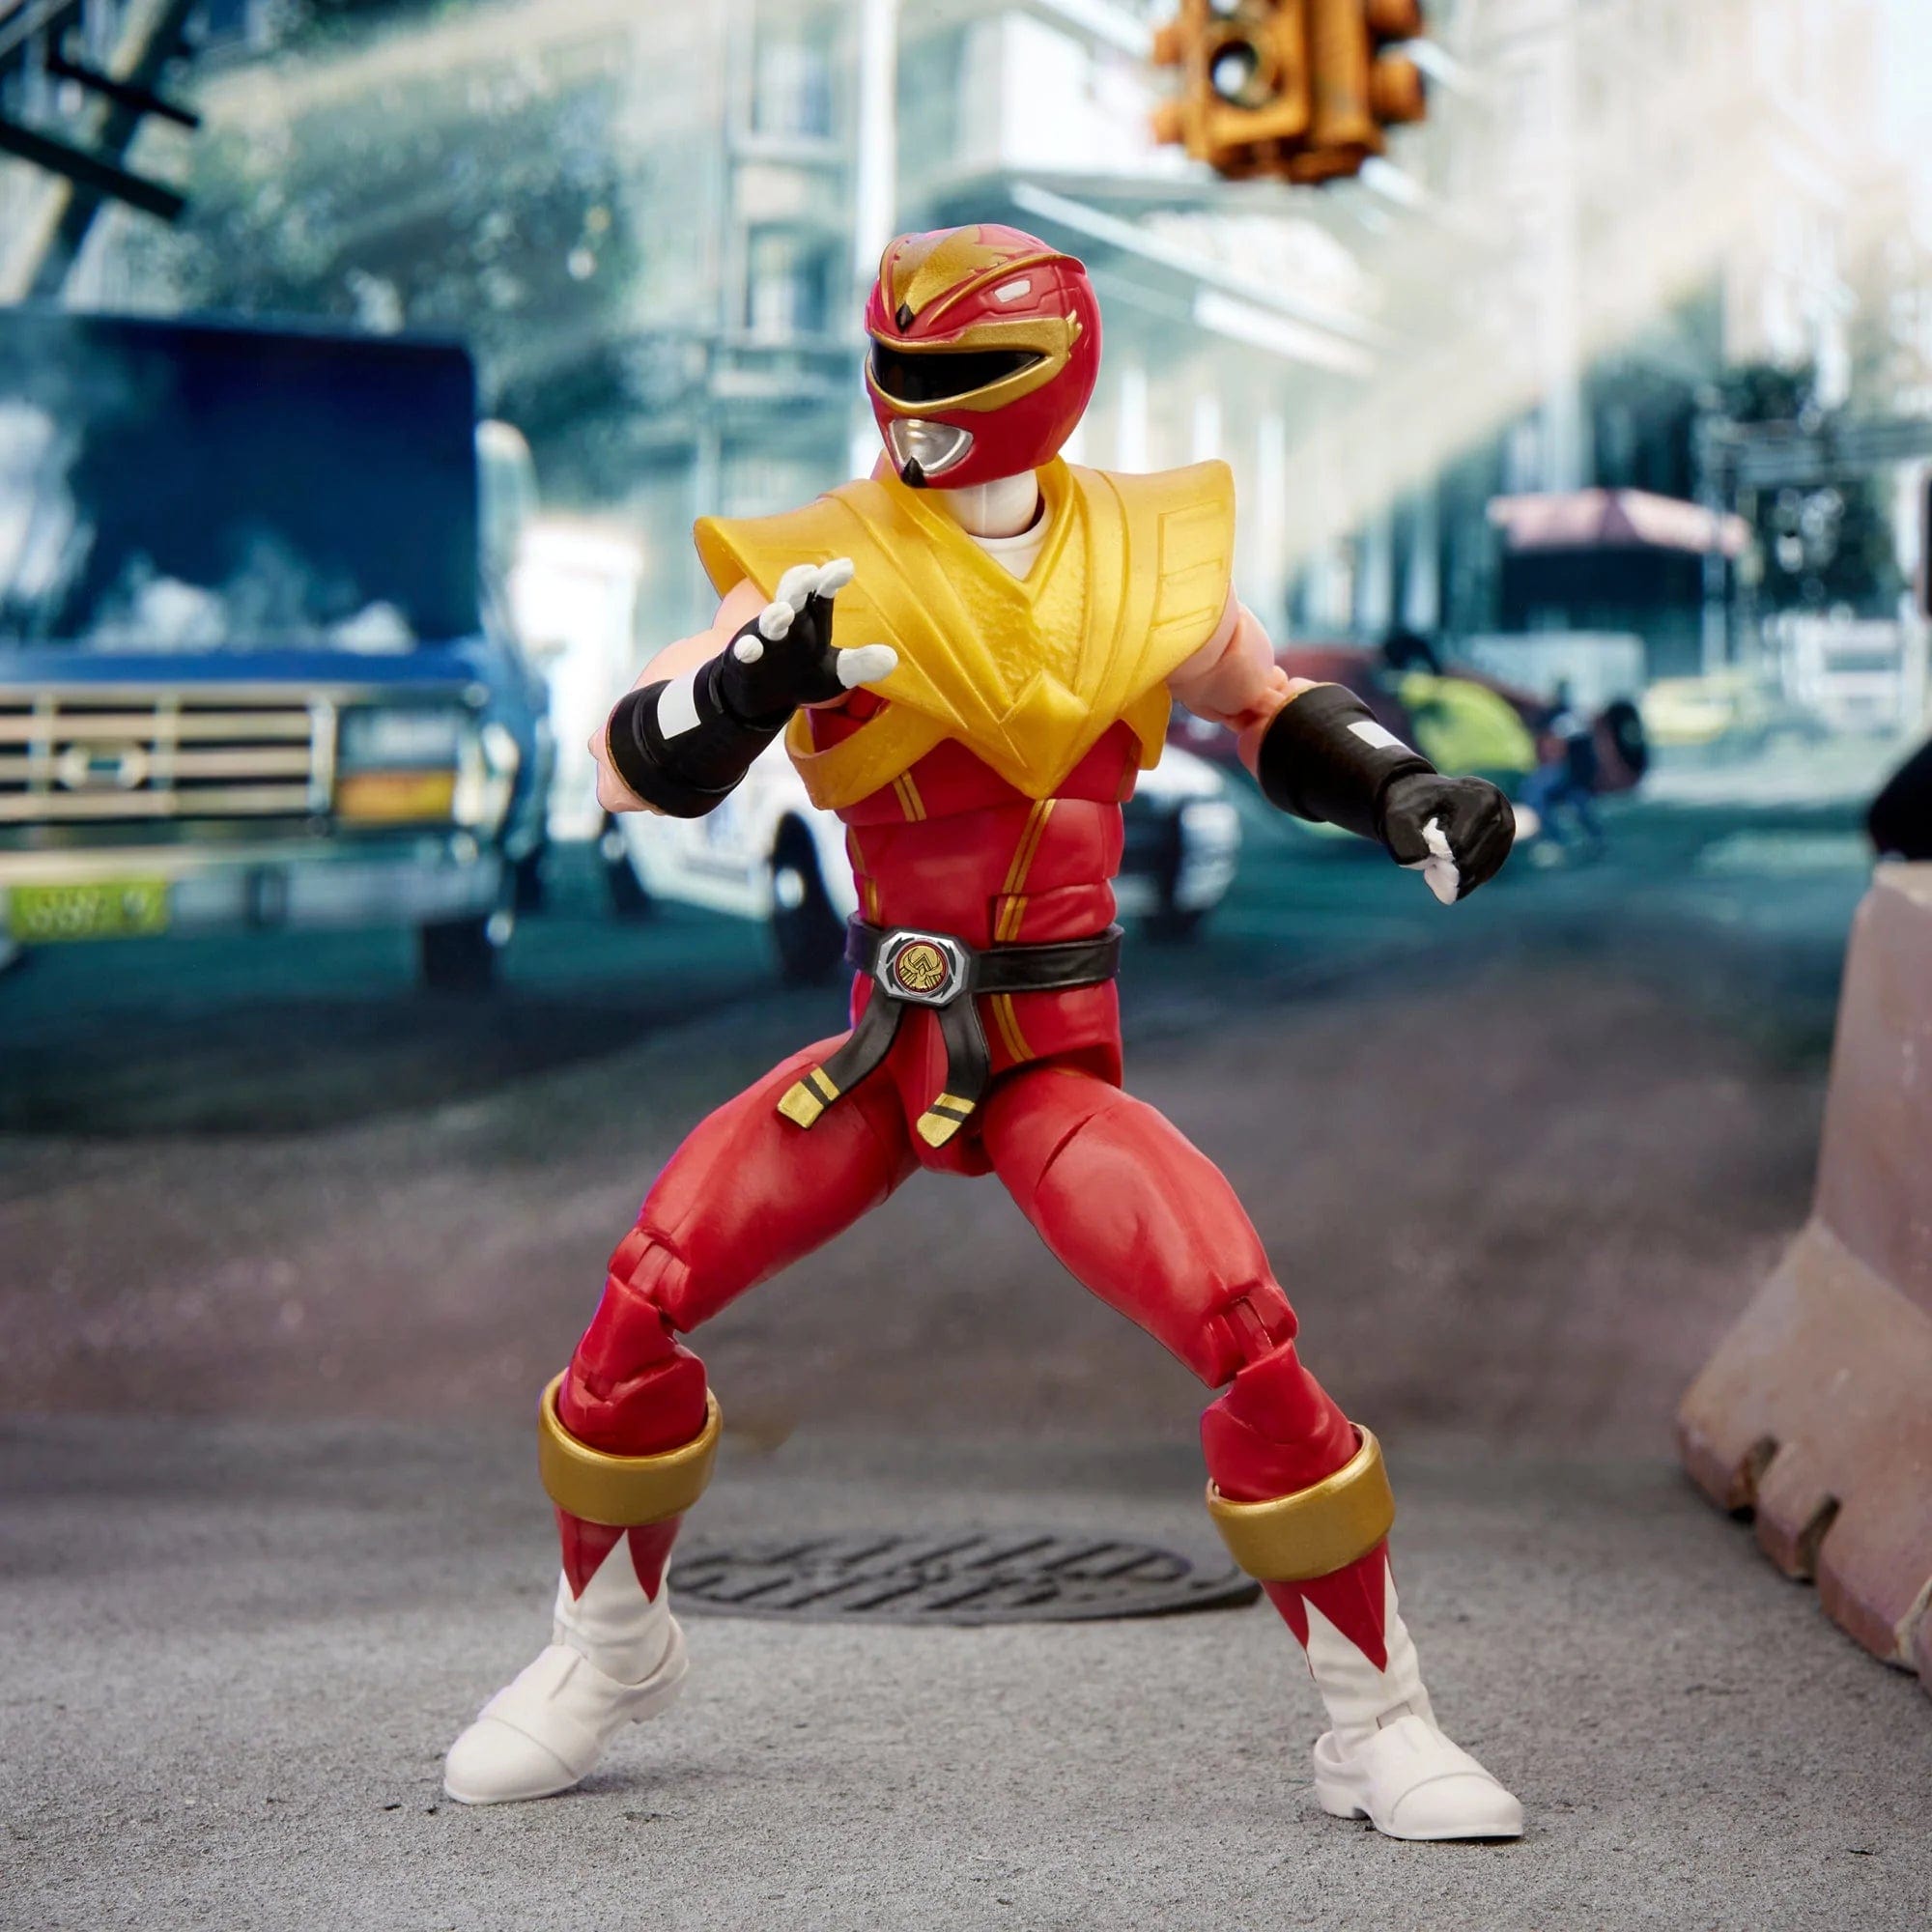 Power Rangers X Street Fighter Lightning Collection Morphed Ken Soaring Falcon Media